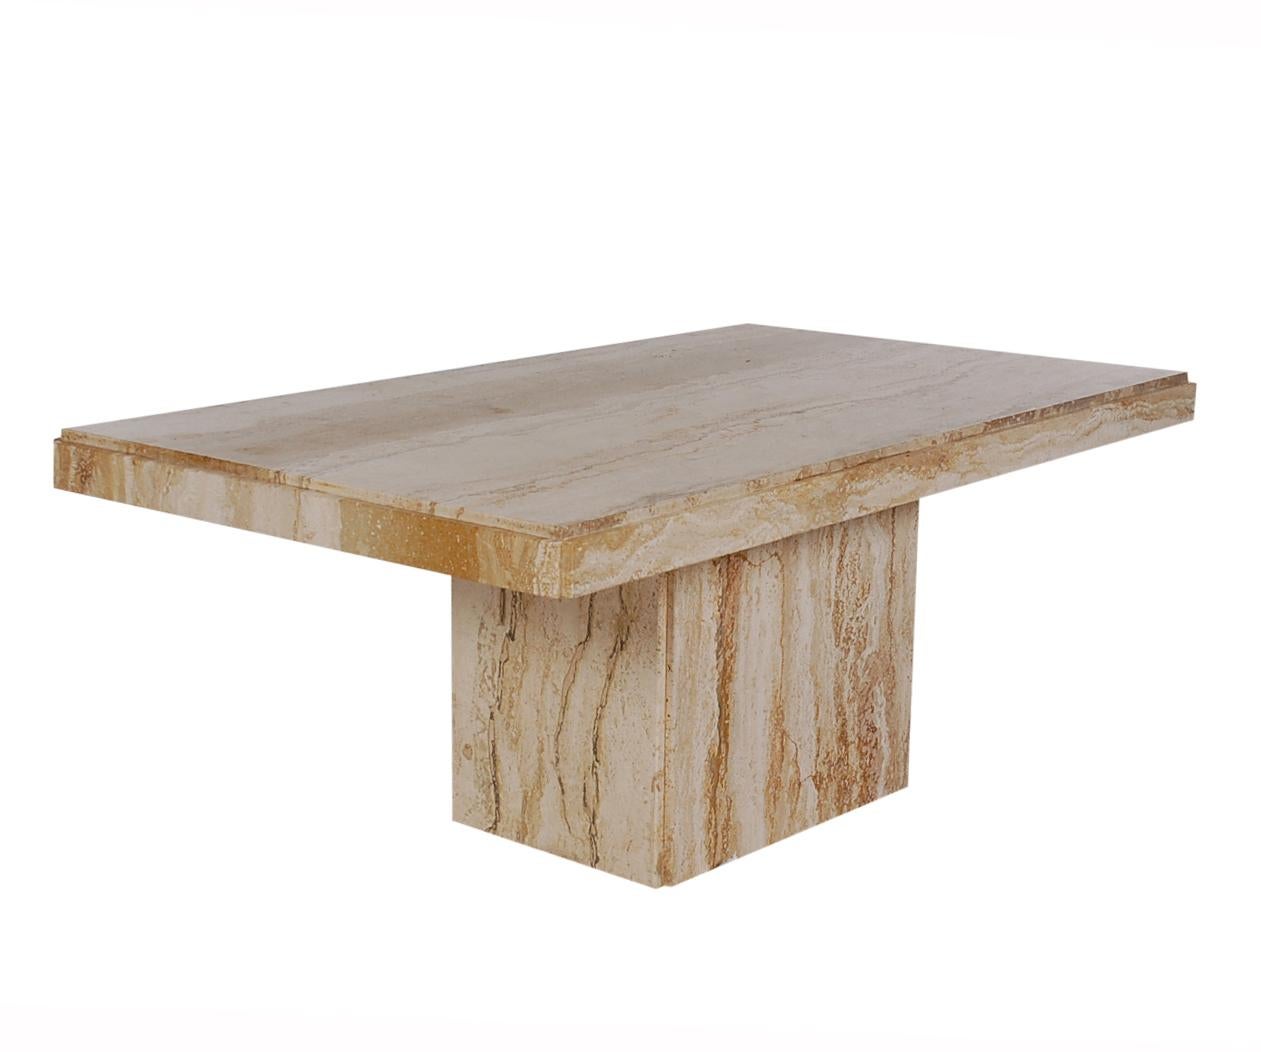 A nice smaller scale coffee table from the 1970s and made in Italy. It features 100% travertine construction with gorgeous veining.